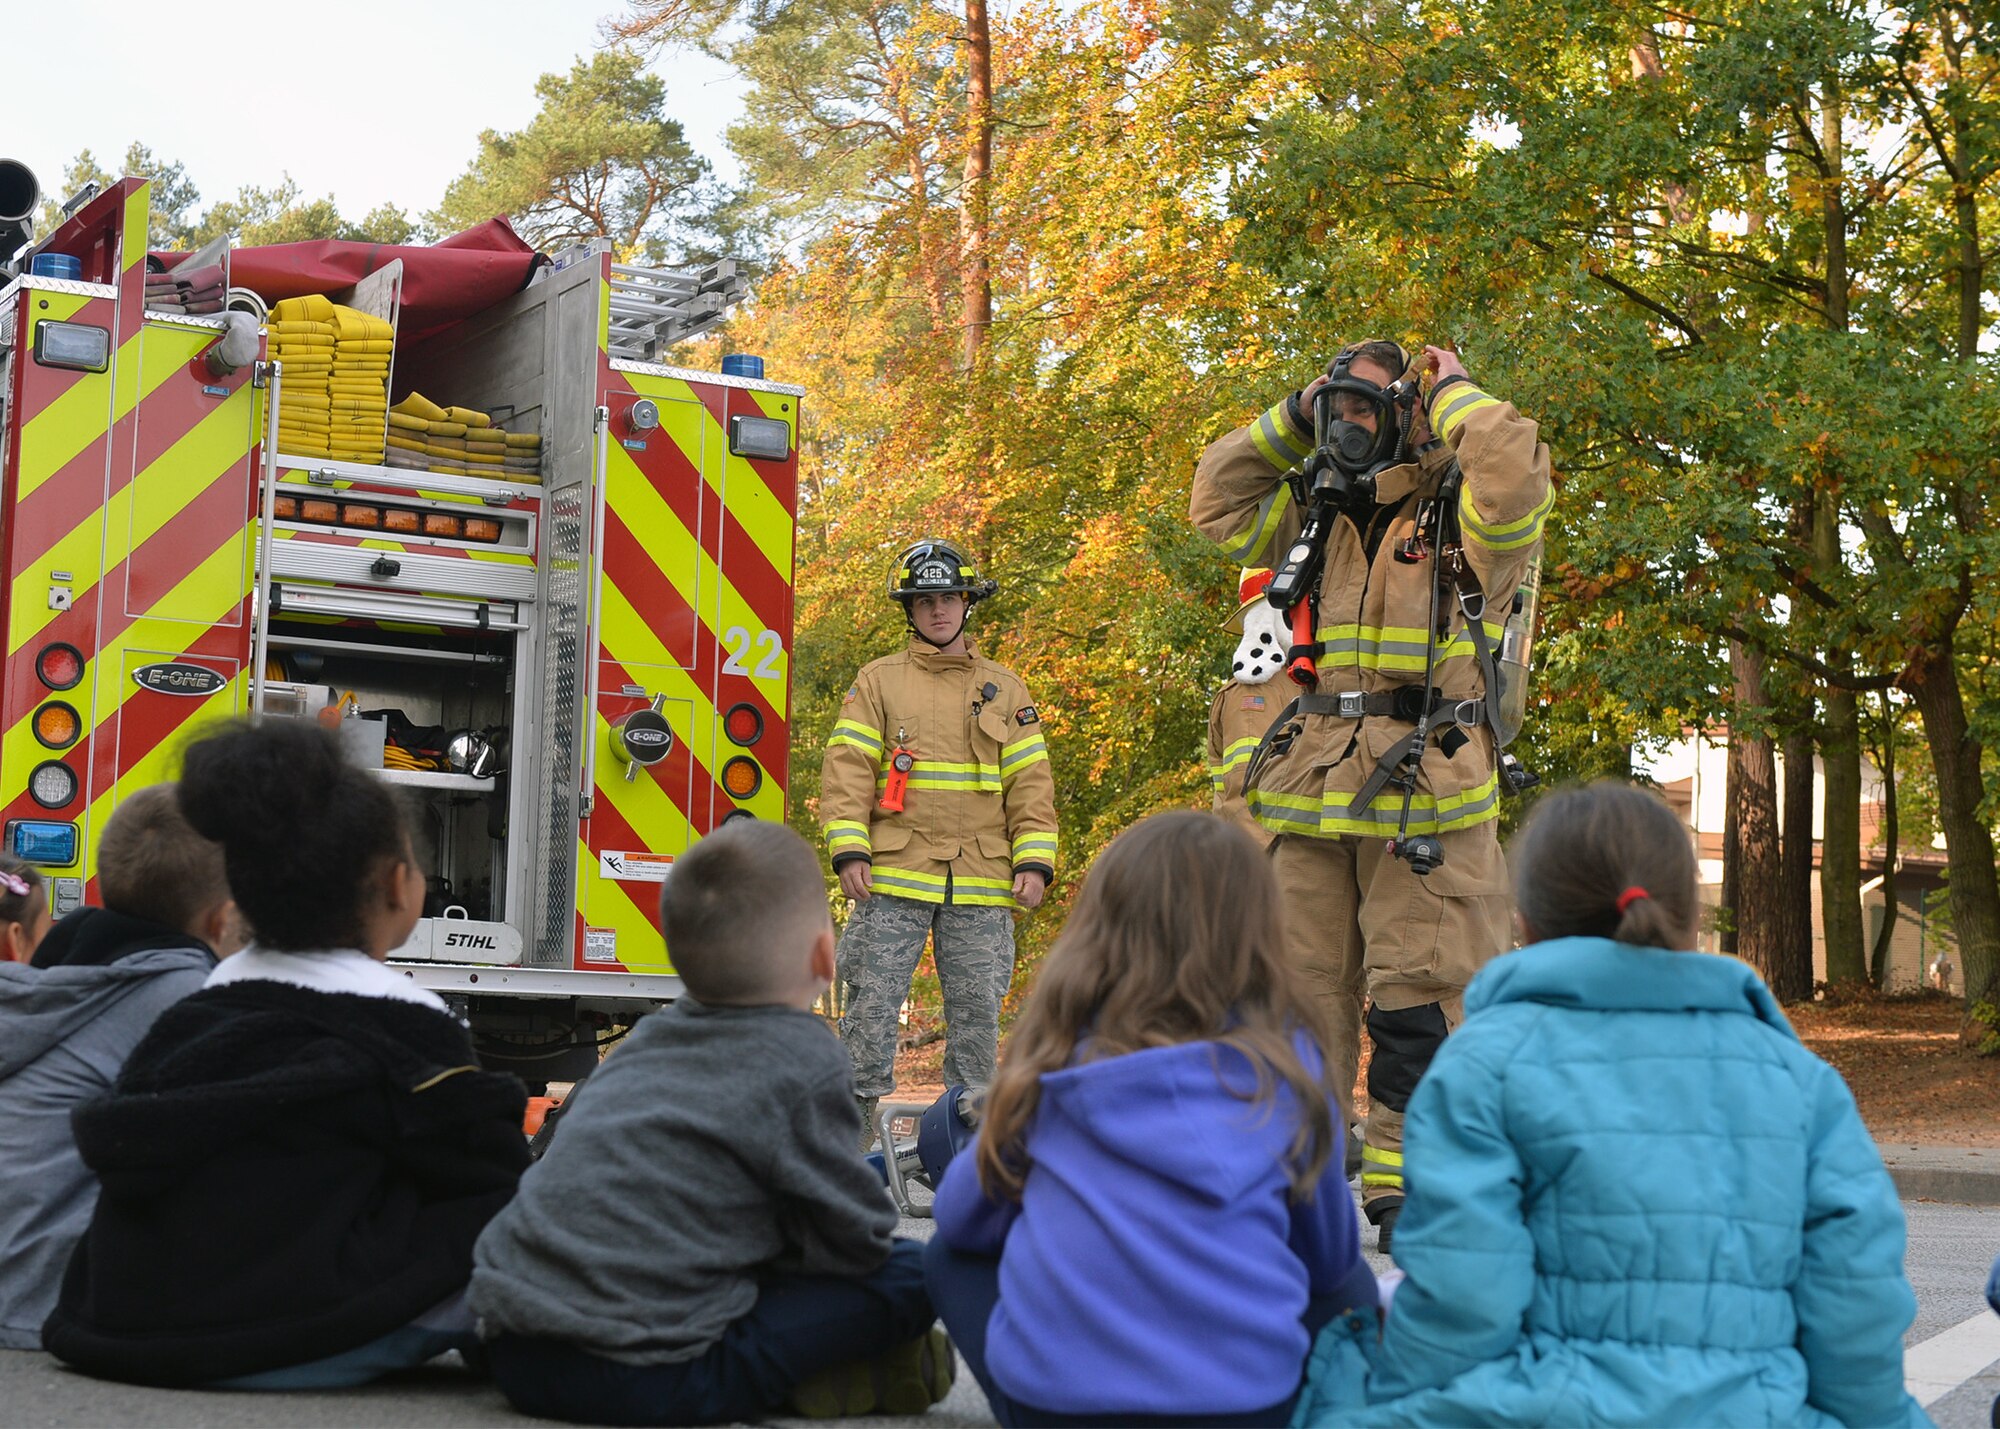 Sascha Rech, 86th Civil Engineer Squadron lead firefighter, displays how firefighters look in their gear to children on Ramstein Air Base, Germany, Oct. 9, 2018. Familiarity with firefighters can help prevent children from being scared of responders during a fire emergency. (U.S. Air Force photo by Staff Sgt. Jimmie D. Pike)